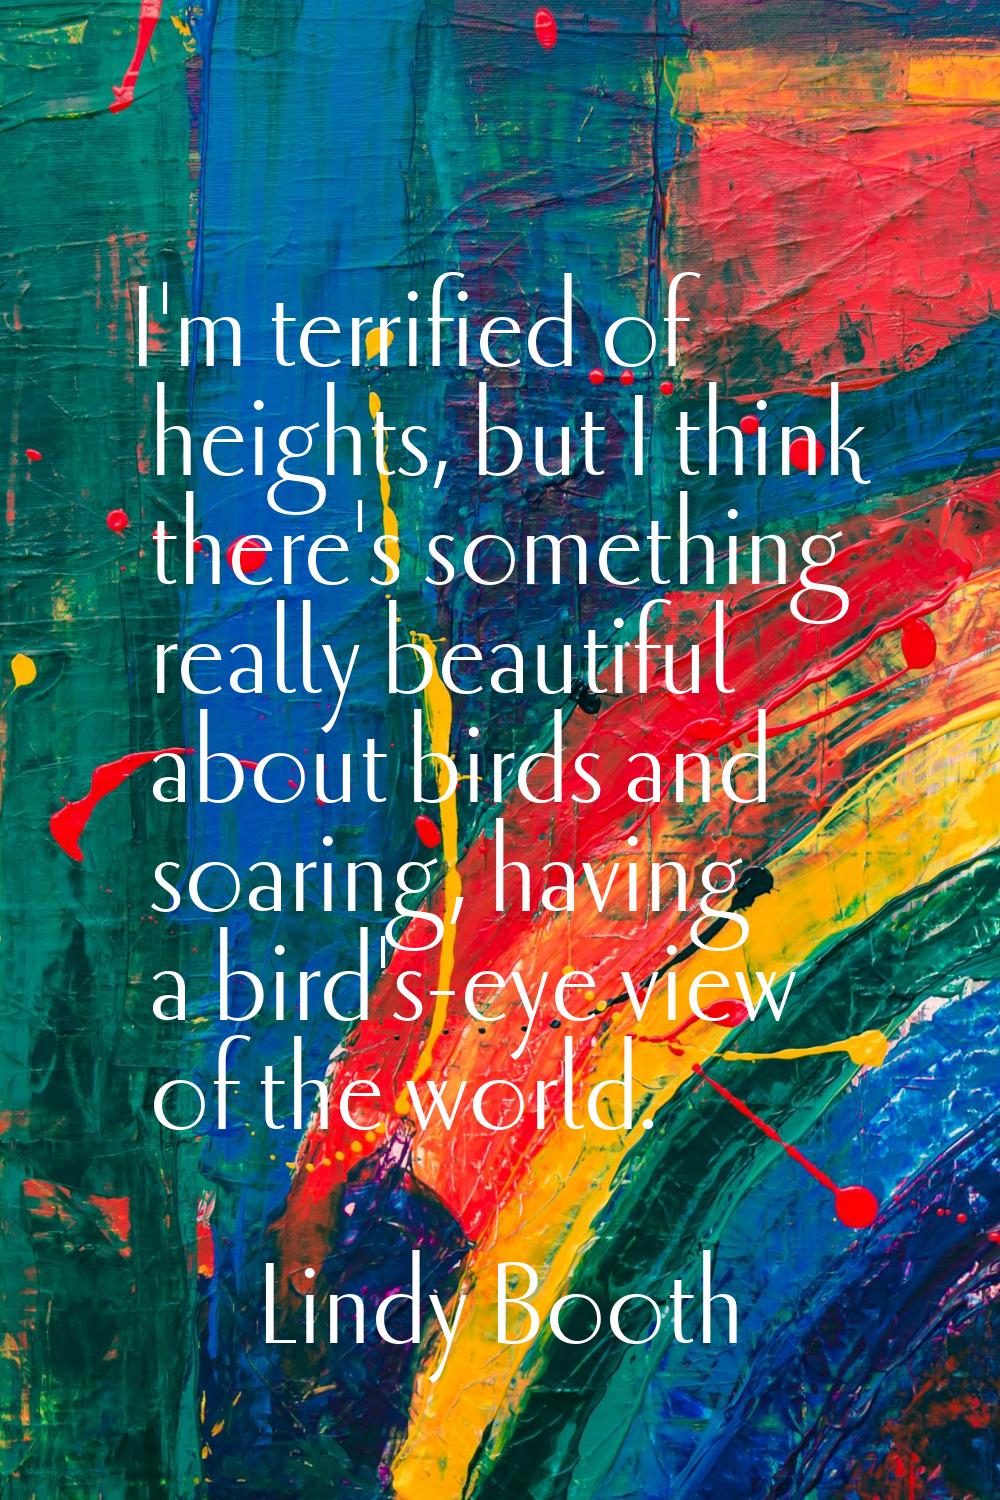 I'm terrified of heights, but I think there's something really beautiful about birds and soaring, h